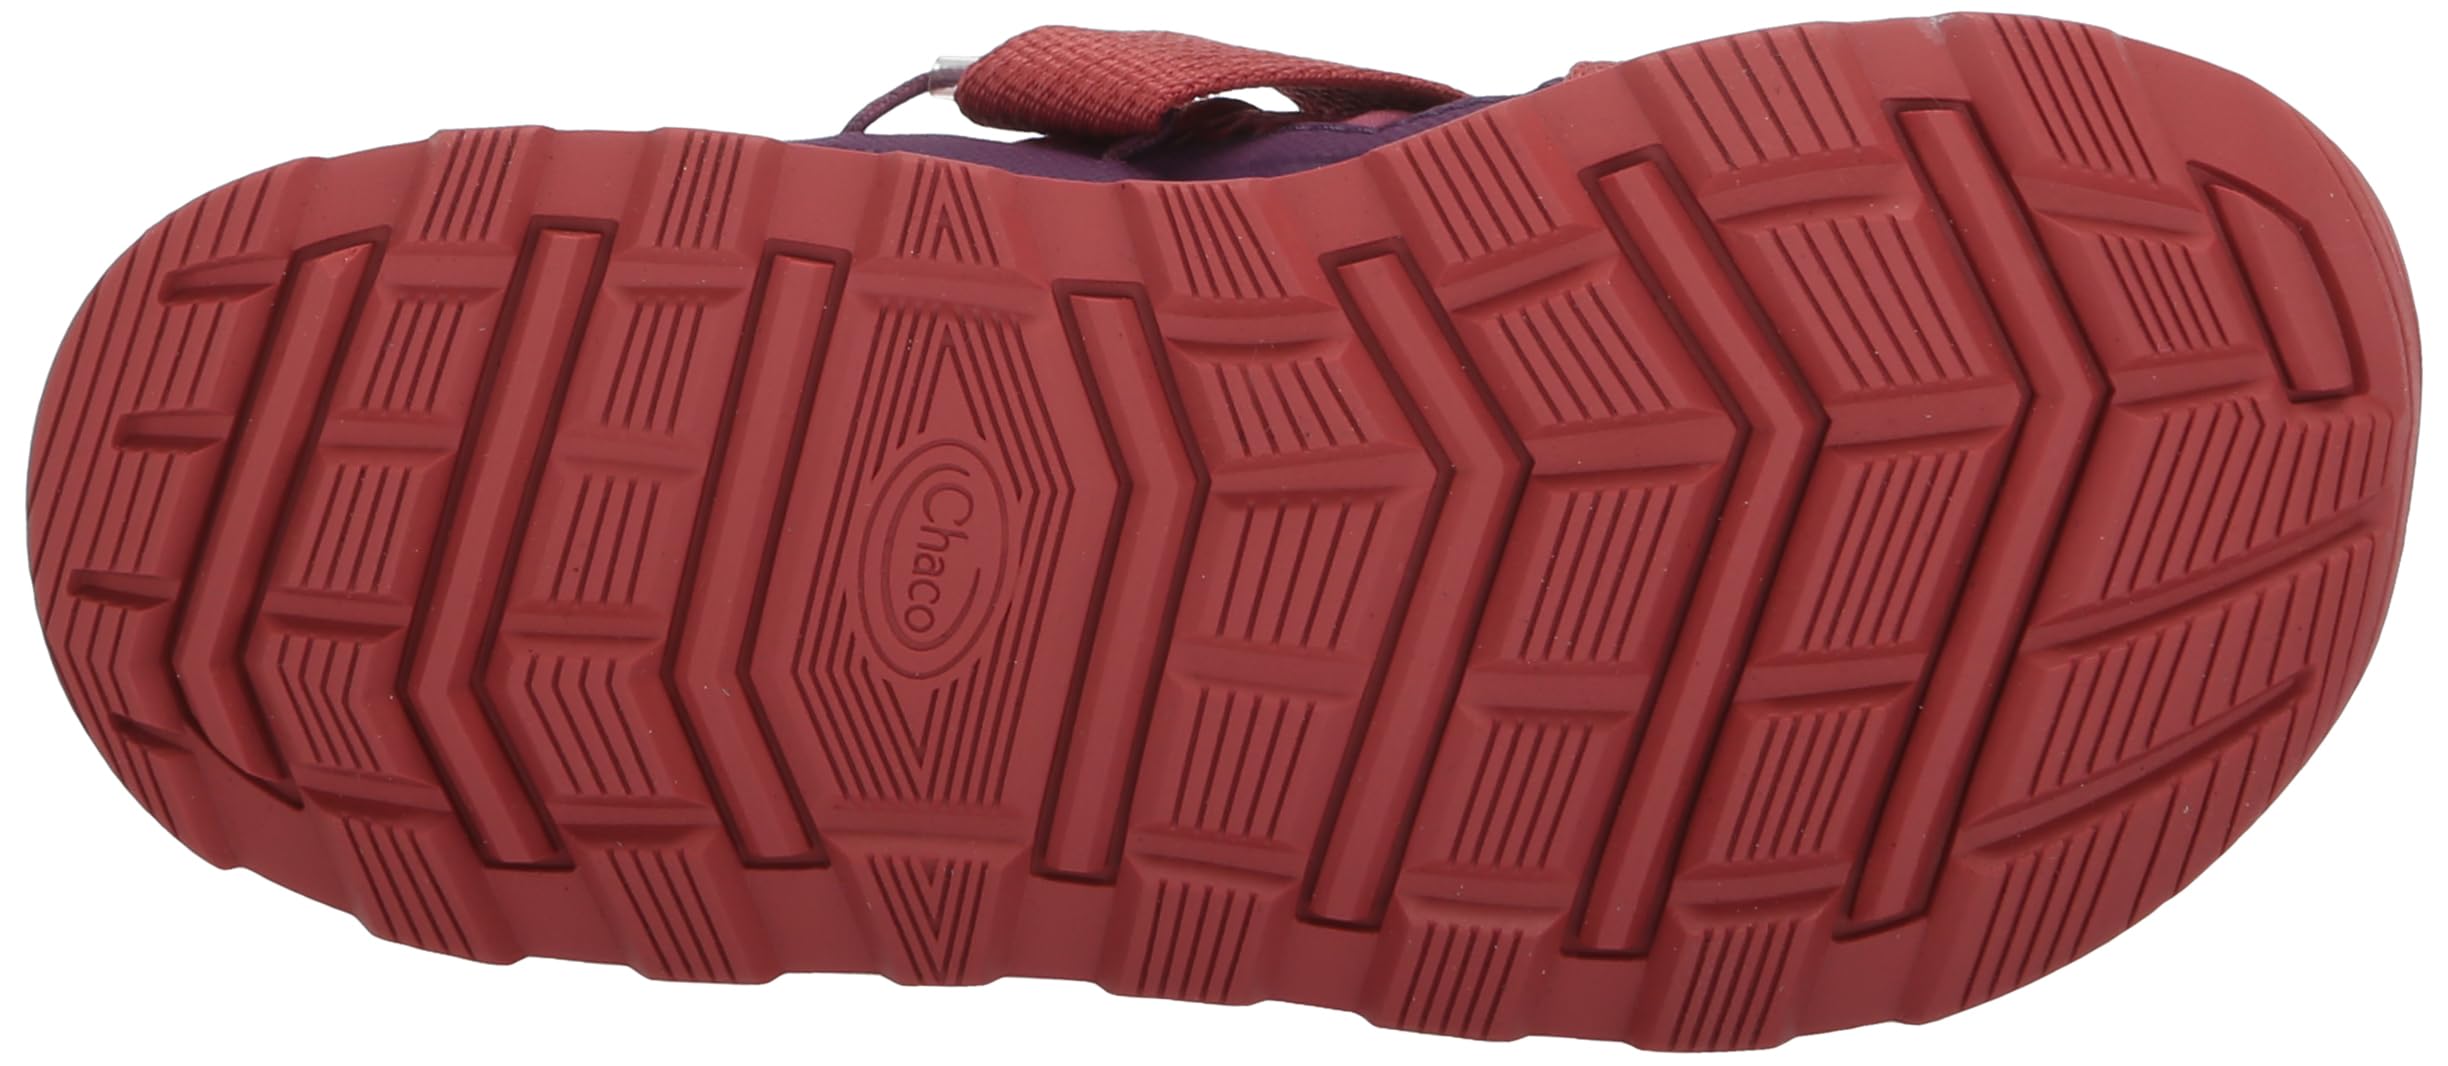 Chaco Unisex-Child Drifter Water Shoe